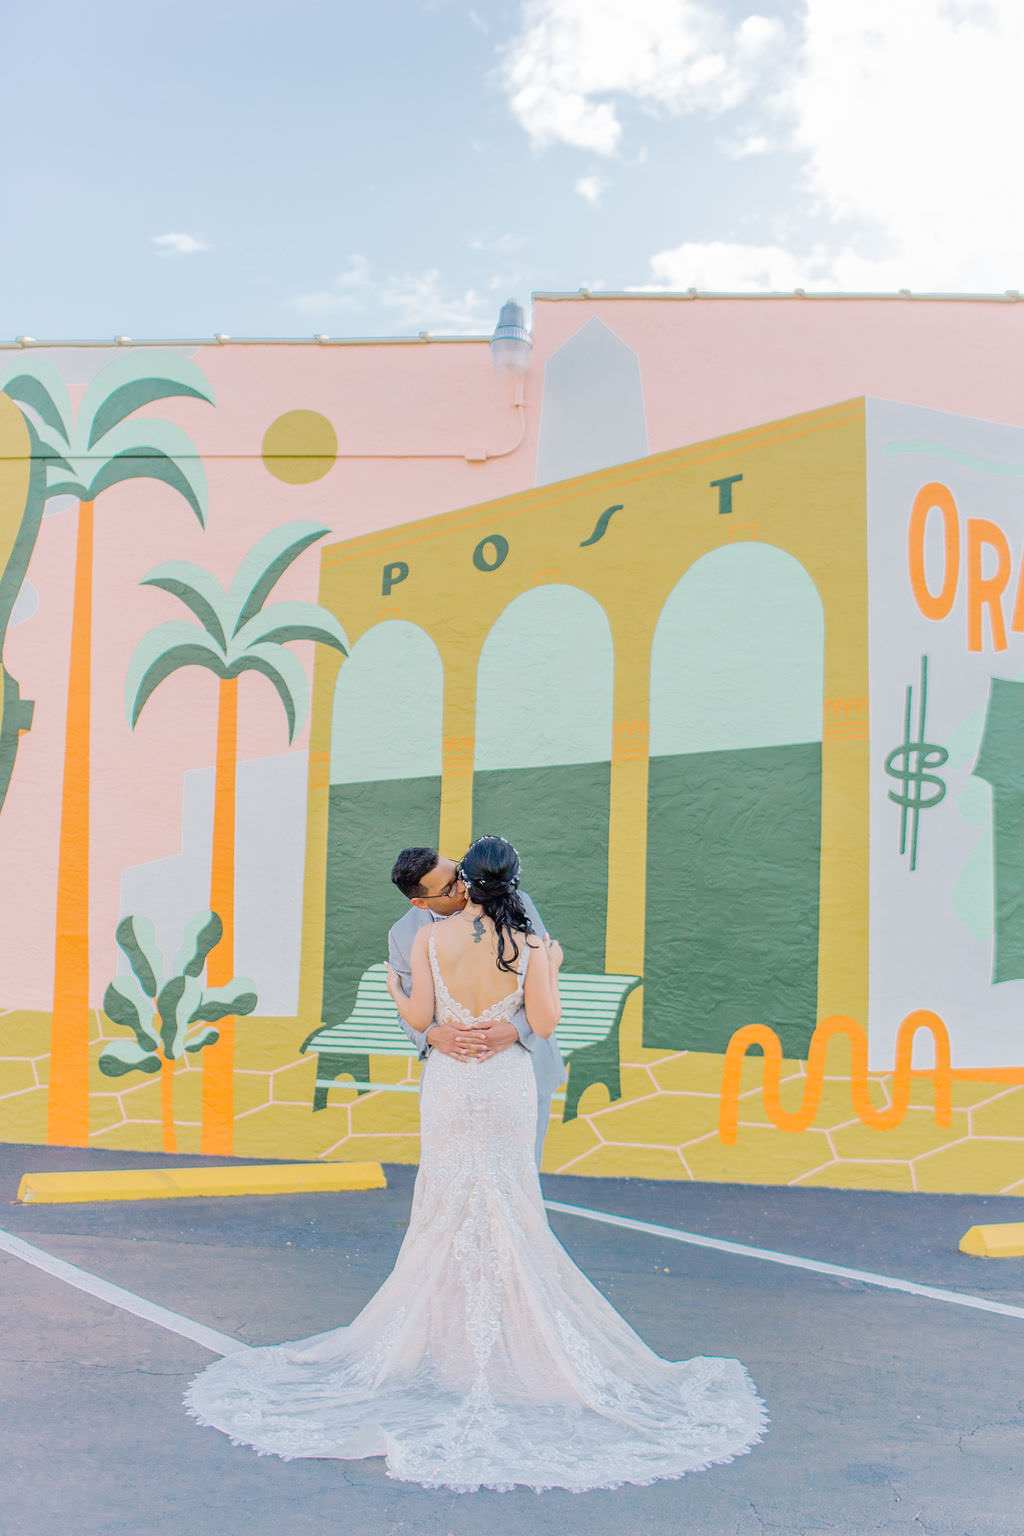 Downtown St. Pete wedding portraits in front of colorful graffiti mural | Tampa Bay Wedding Photographer Kera Photography